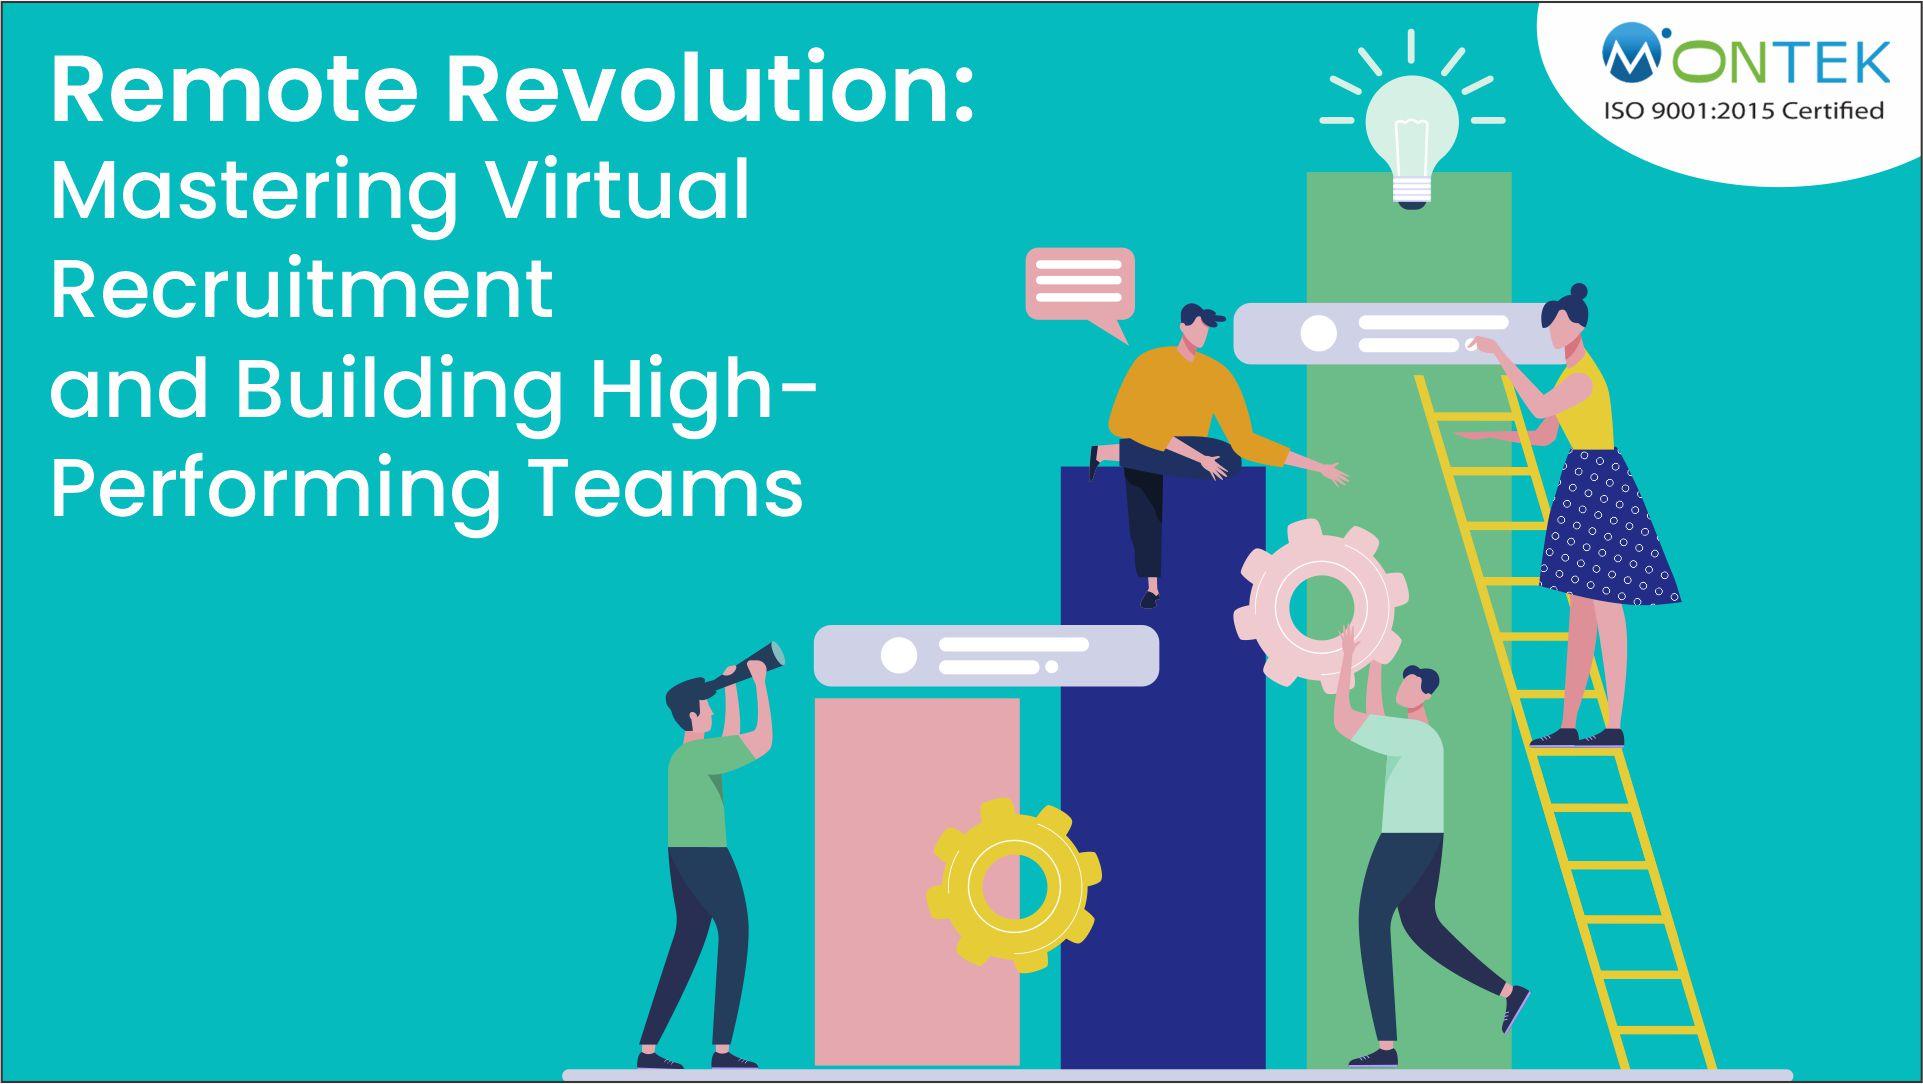 Remote Revolution: Mastering Virtual Recruitment and Building High Performing Teams